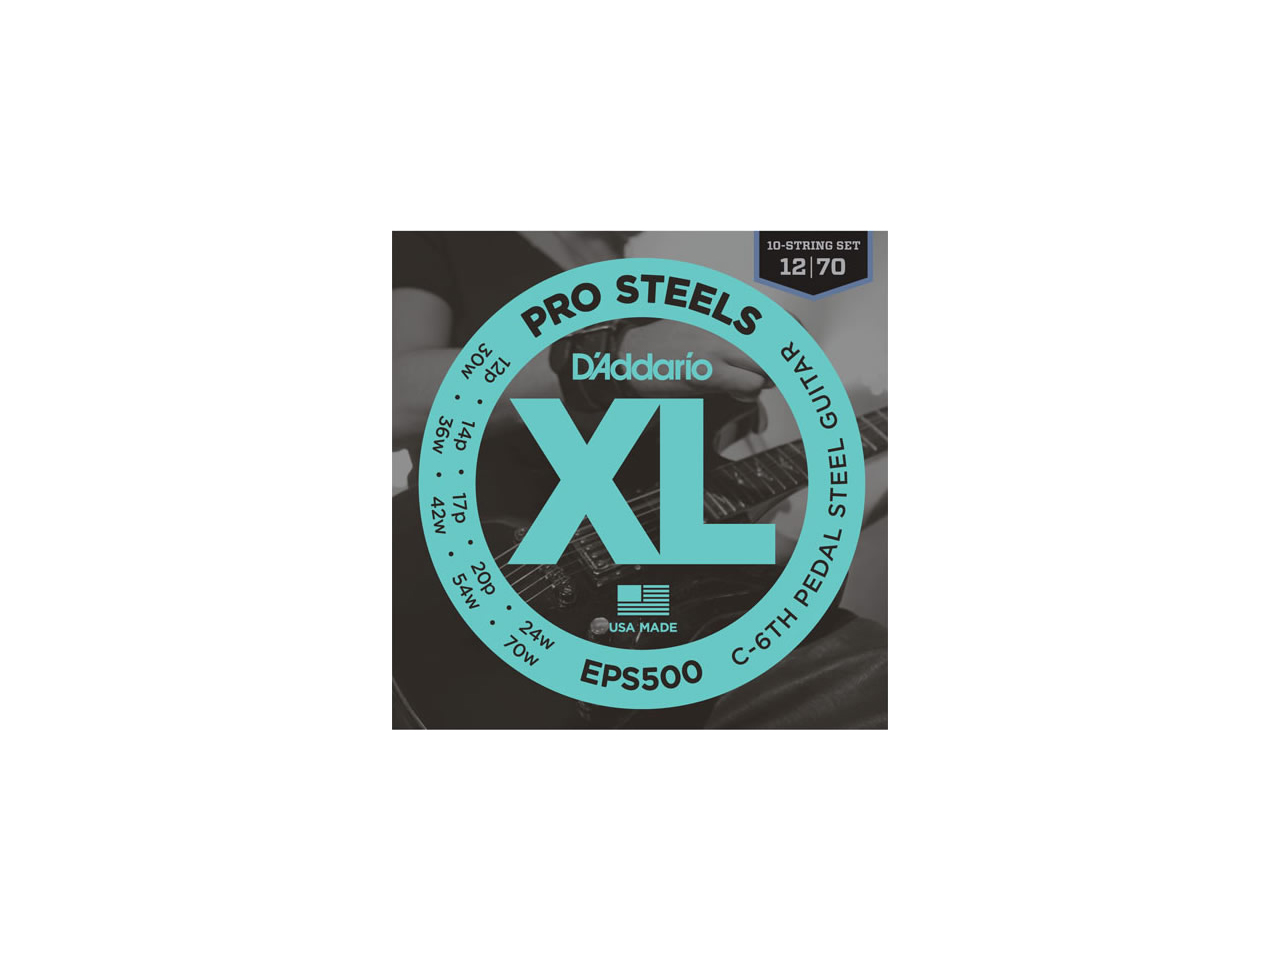 D'Addario(ダダリオ) XL ProSteels Round Wound C-6th Pedal Steel Tuning / EPS500 (エレキギター弦)